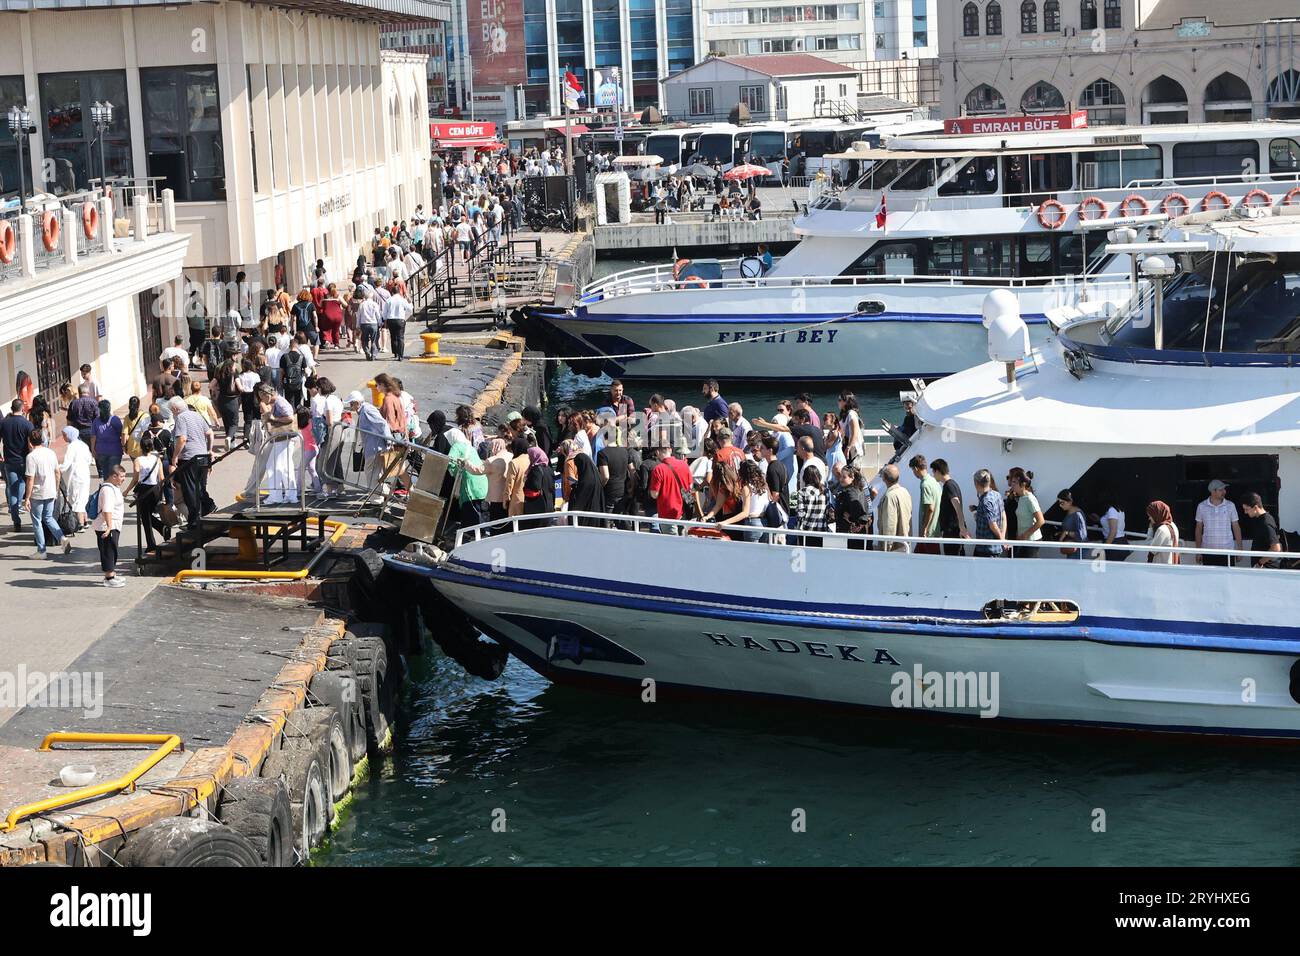 Passengers disembarking at the ferry terminus in the Kadikoy district of Istanbul Stock Photo